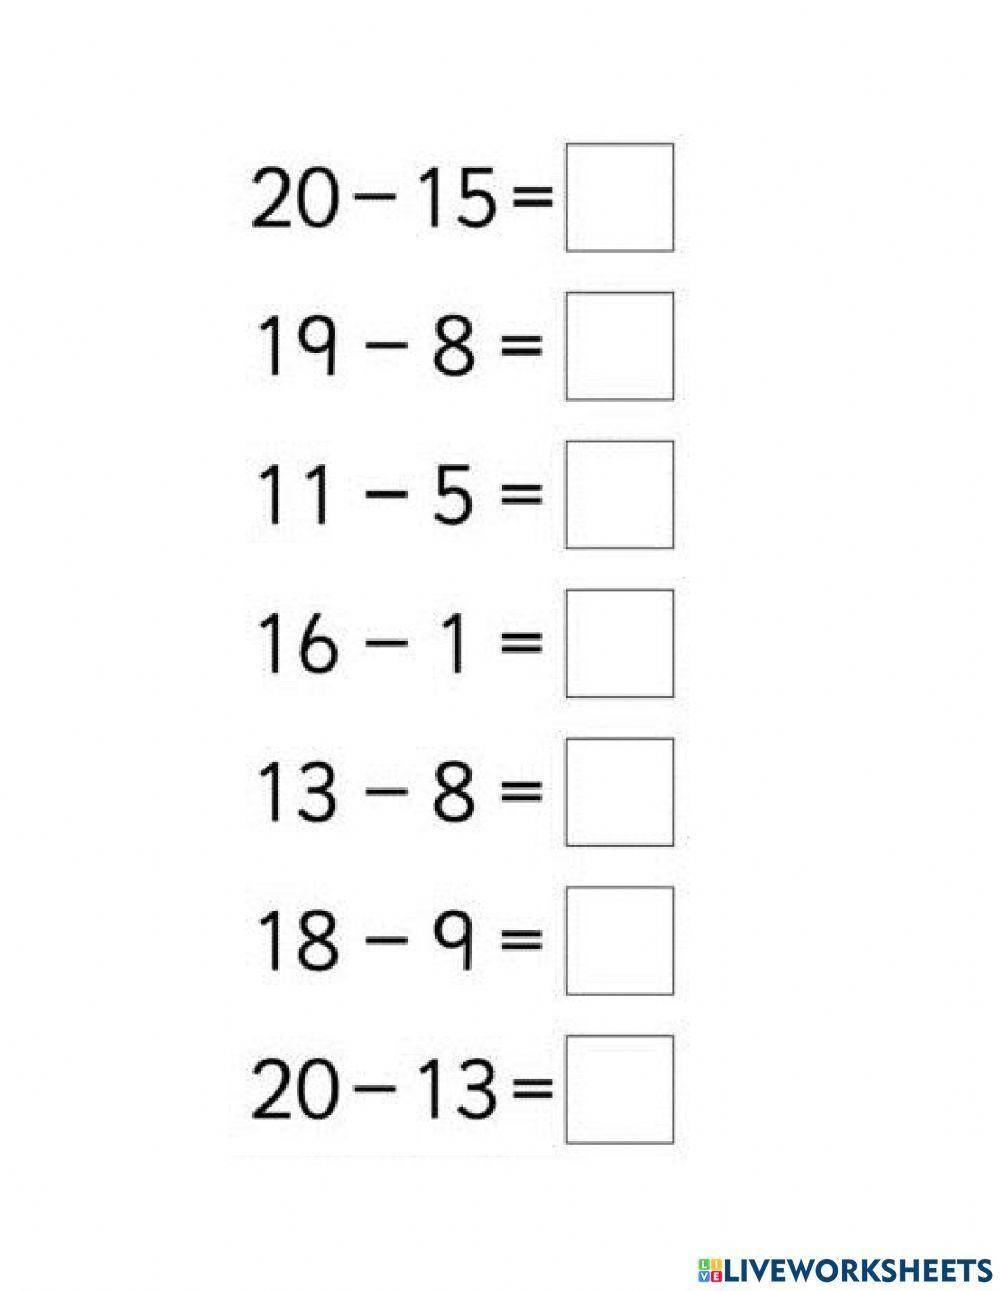 Subtract single number from a two digit number